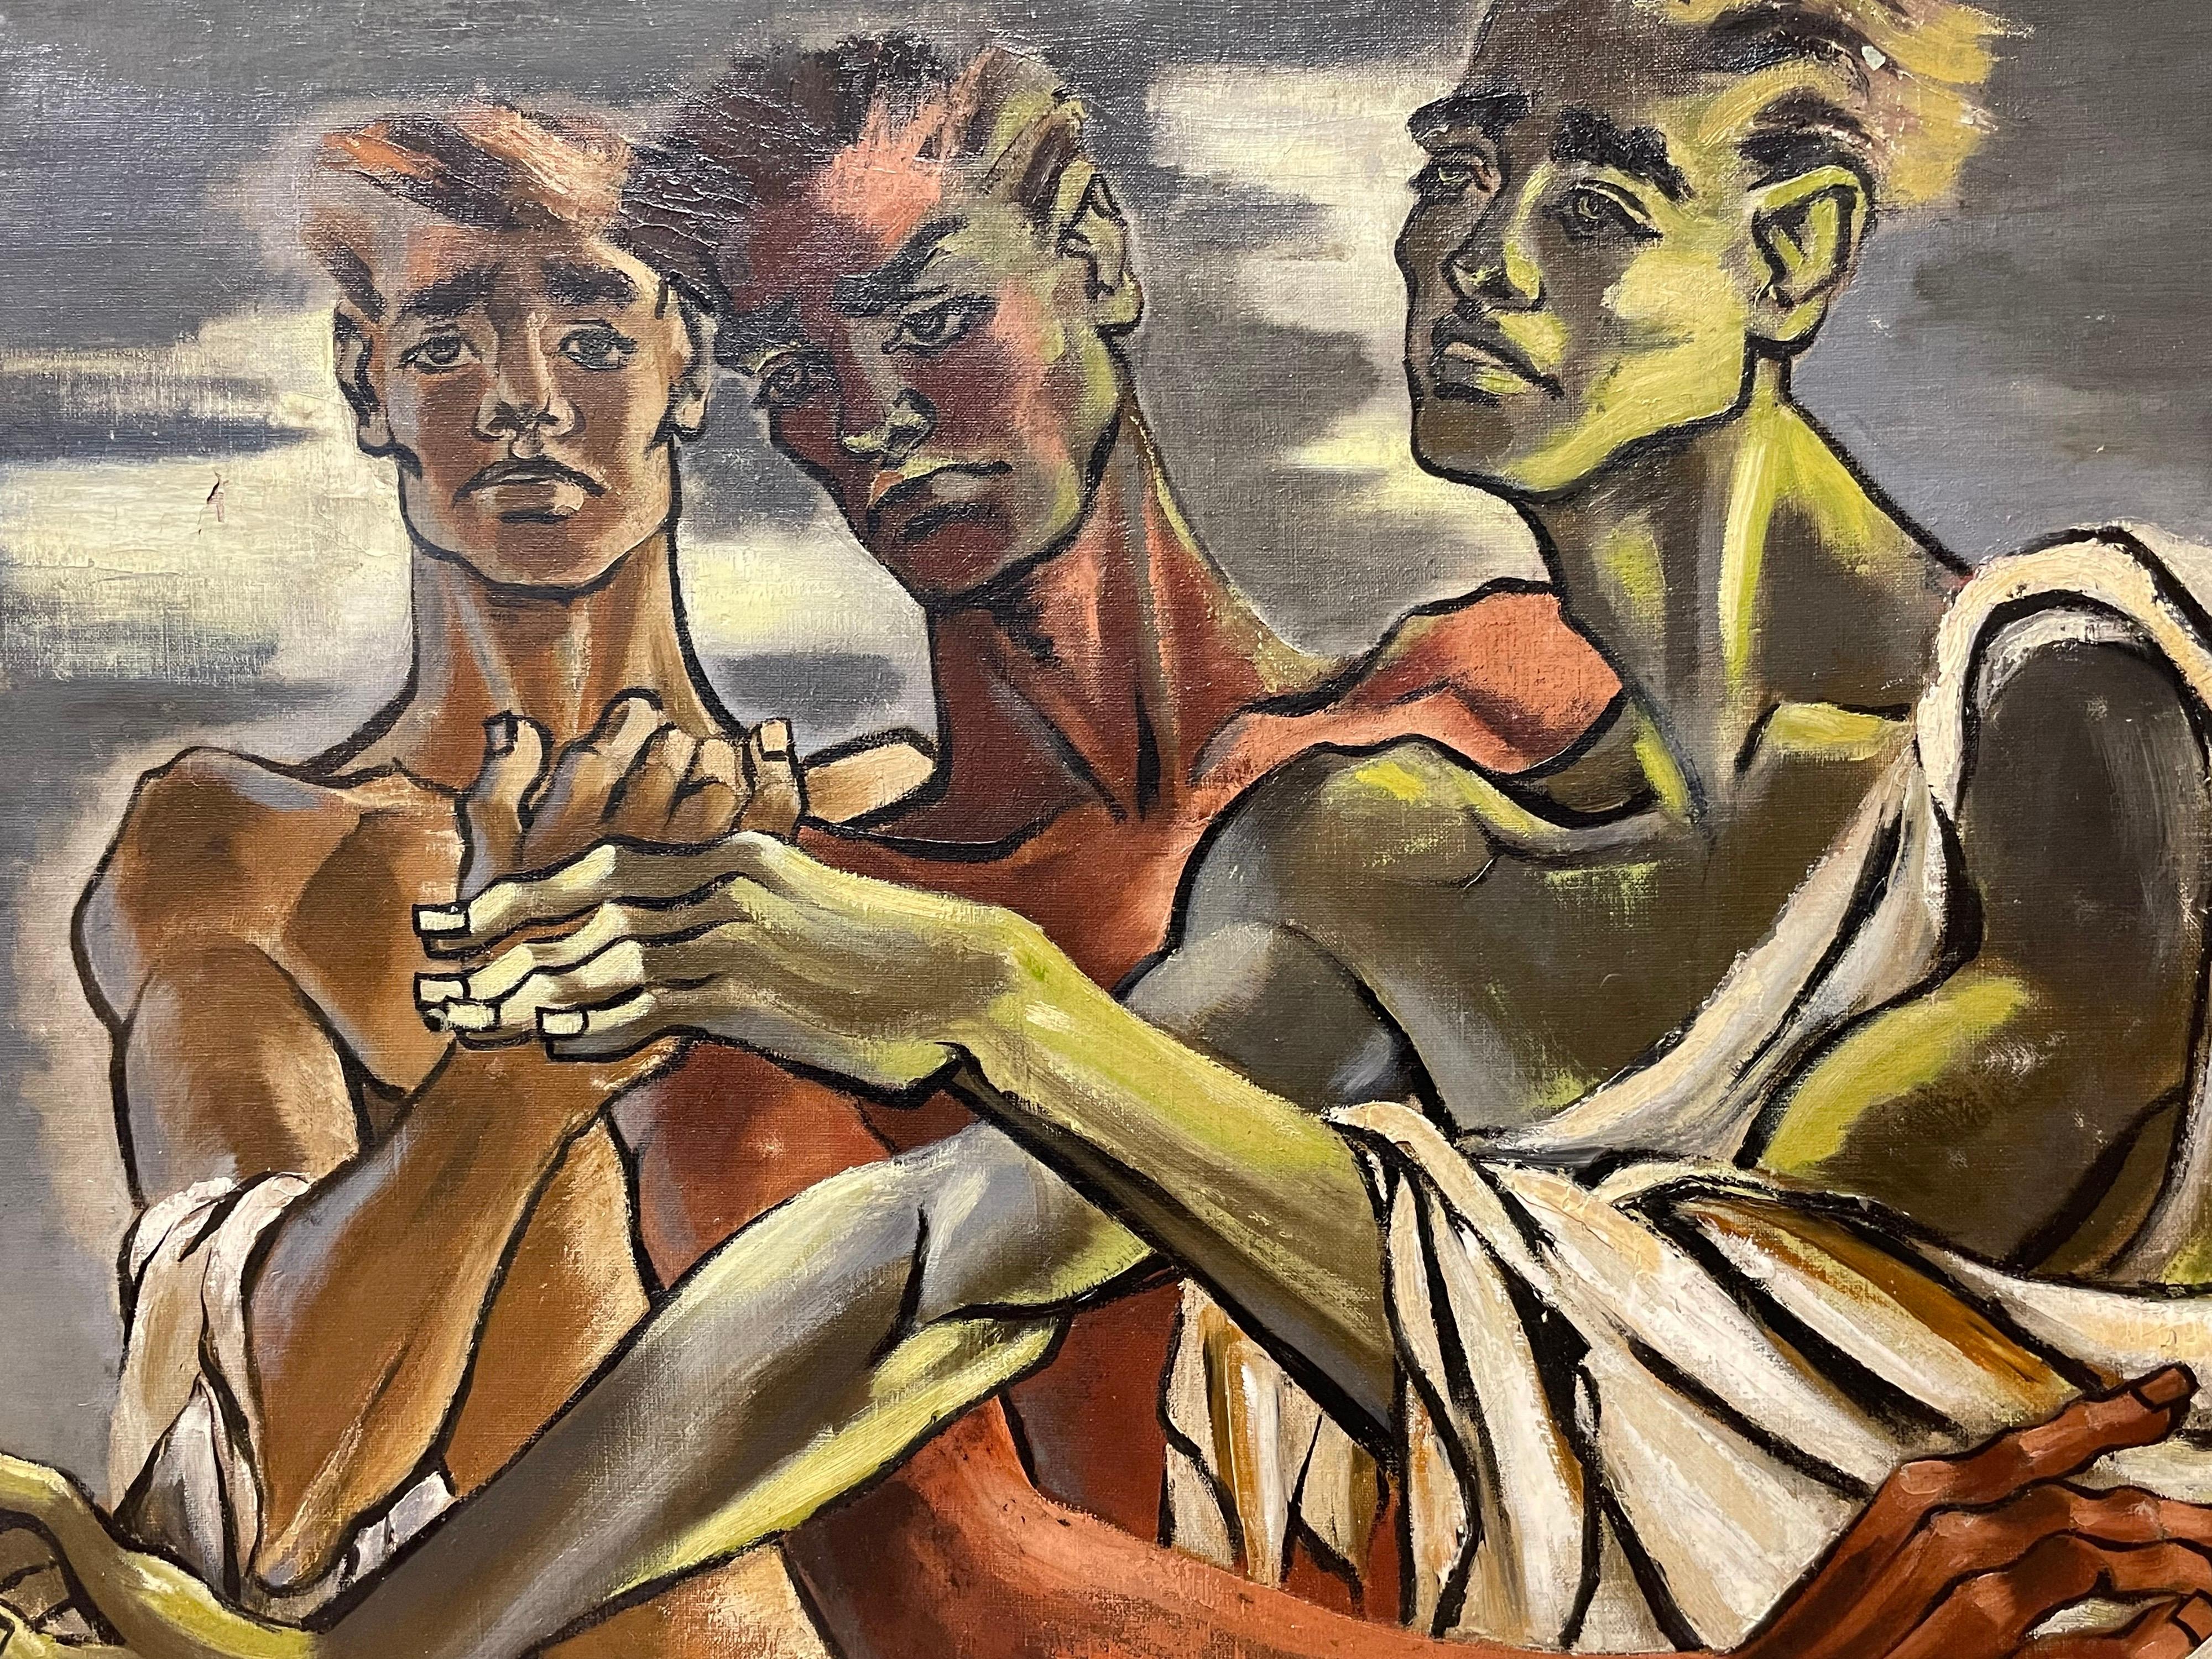 1950's French Modernist Cubist Signed Oil - Three Muscular Semi Nude Men Robes - Brown Figurative Painting by French modernist